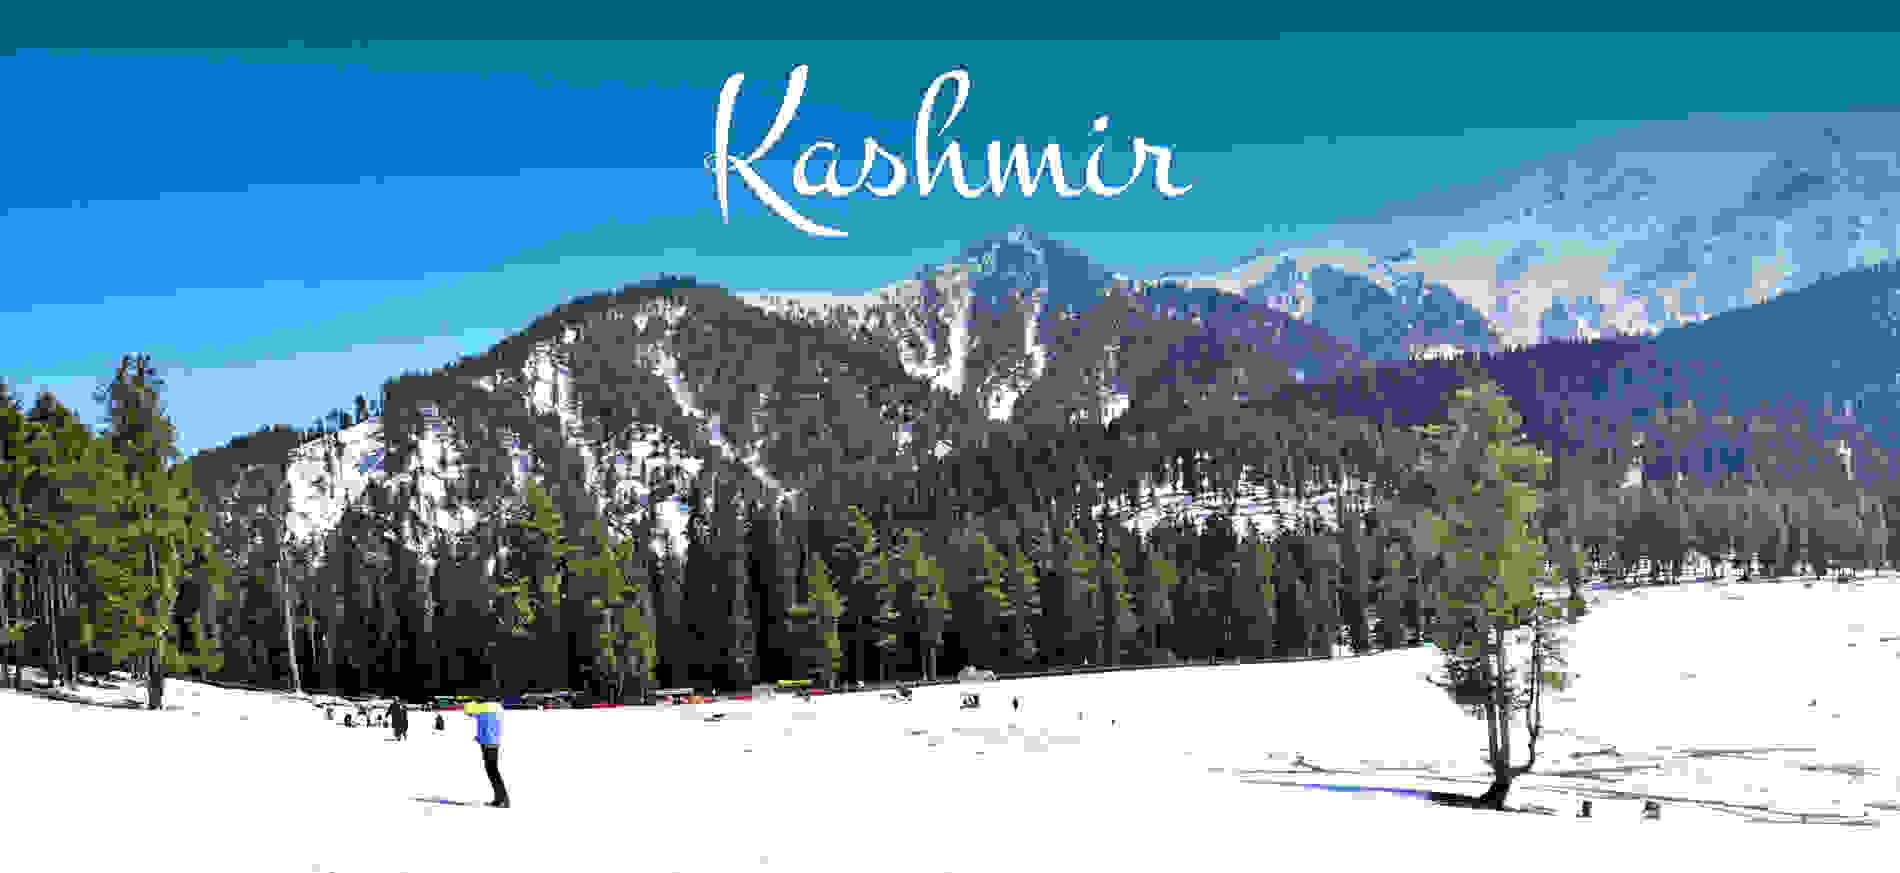 Kashmir Tour Packages at Best Price â€“ Ajay Modi TravelsTour and TravelsTour PackagesAll Indiaother